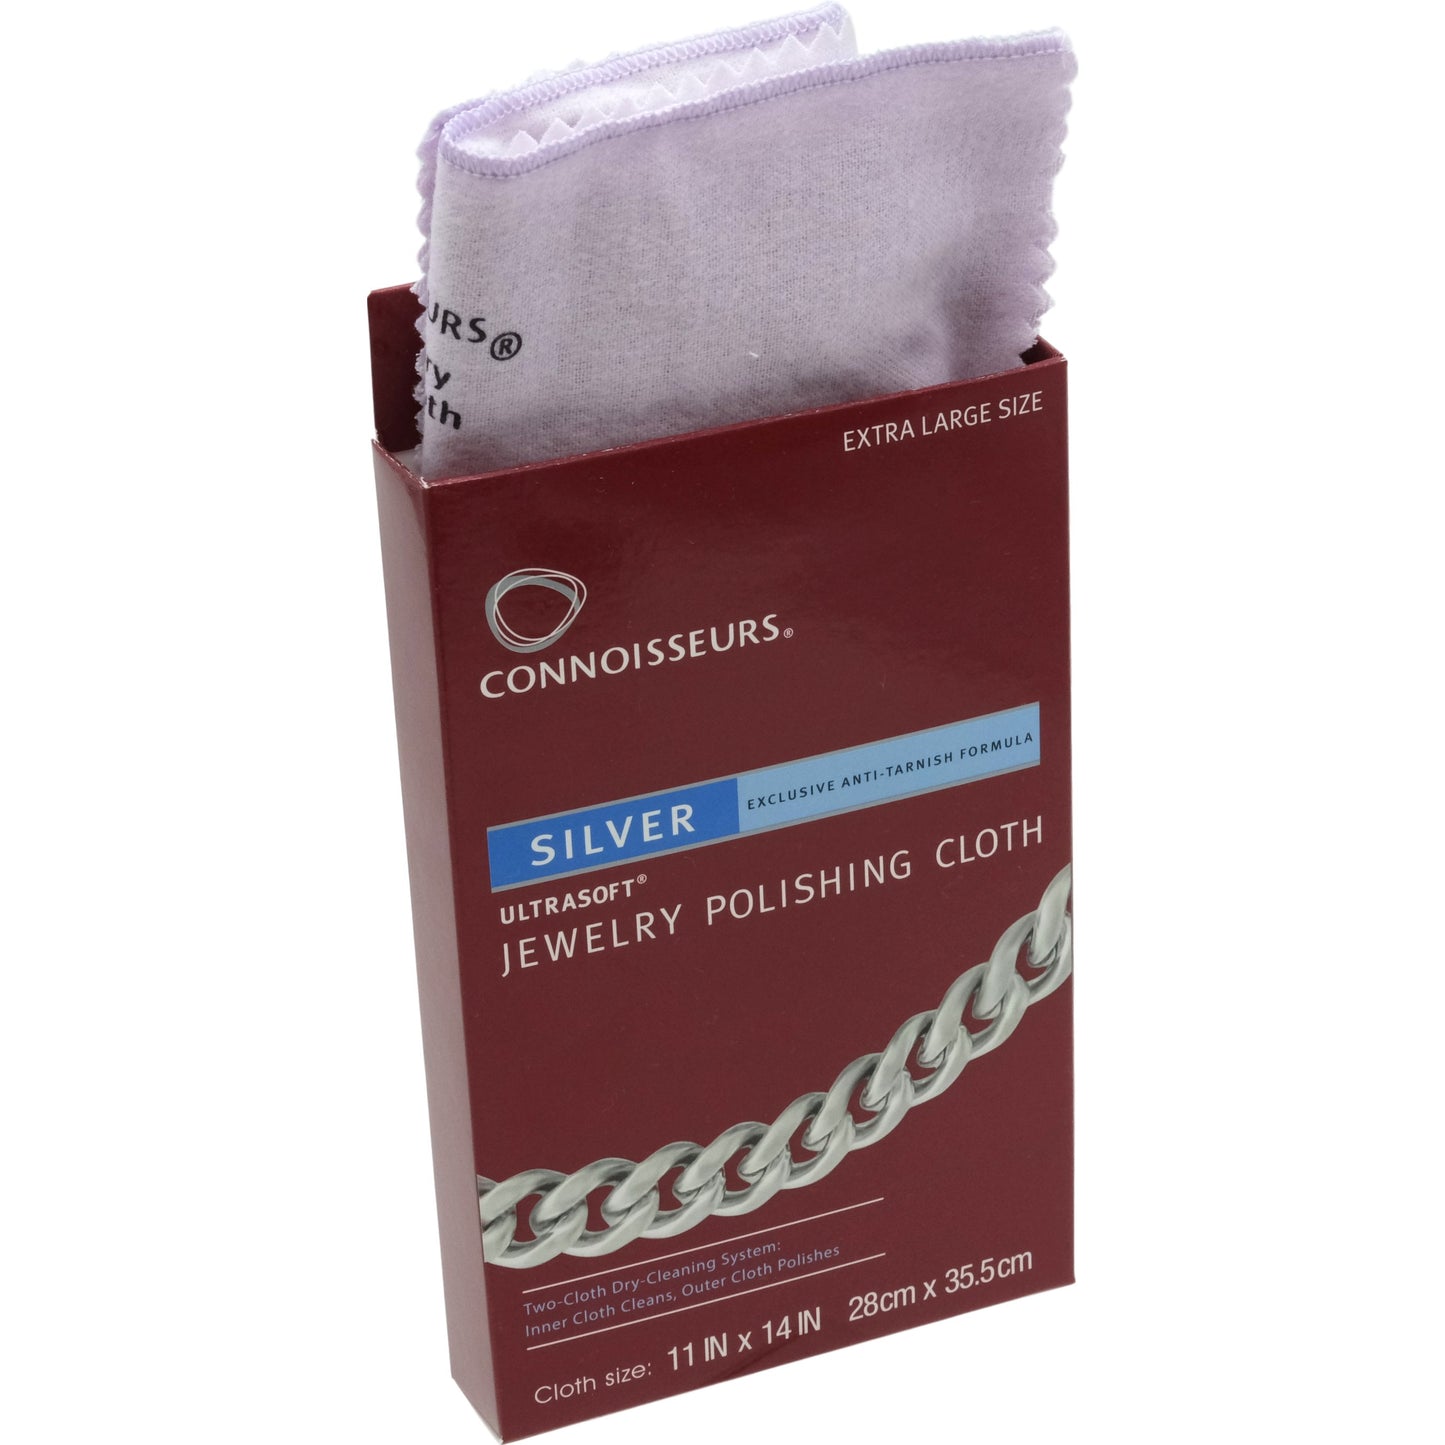 Connoisseurs Silver Jewelry Polishing Cloth